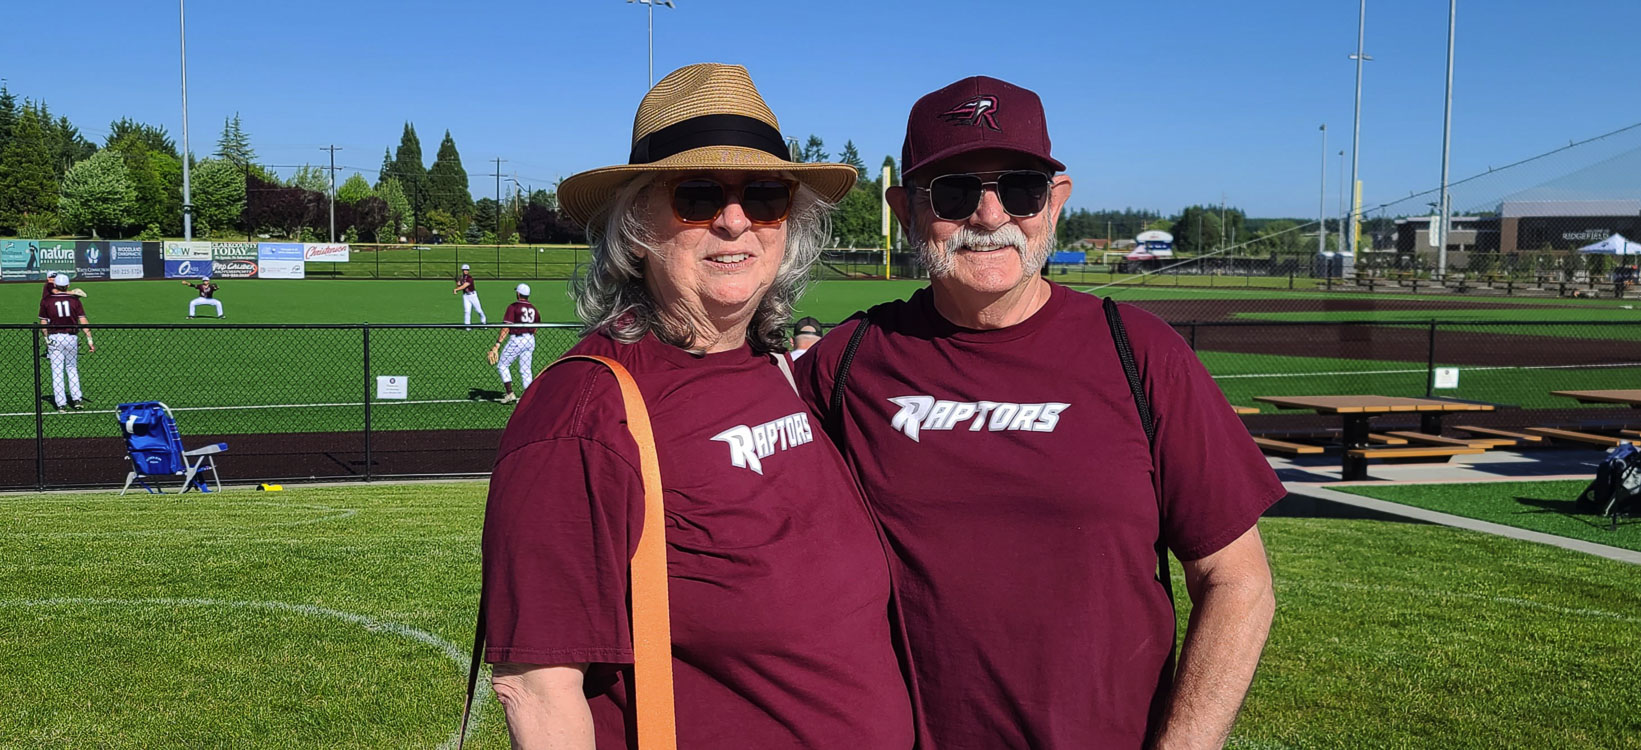 Linda and Greg Silva of Woodland said they attended every home game of the Ridgefield Raptors in 2019. They are grateful that baseball is back, a sure sign of recovery. Photo by Paul Valencia